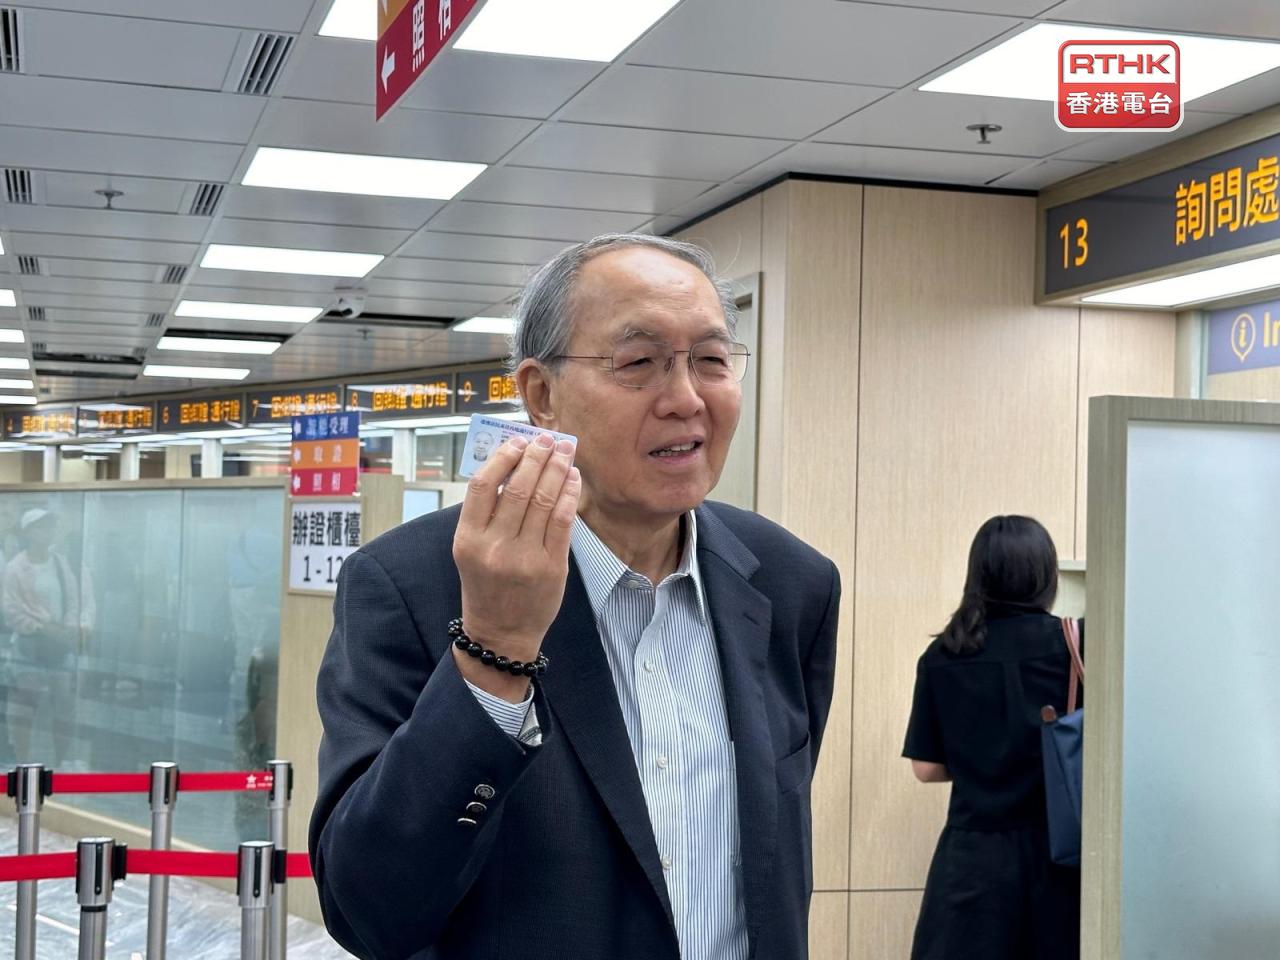 Foreign business leaders laud new mainland travel card